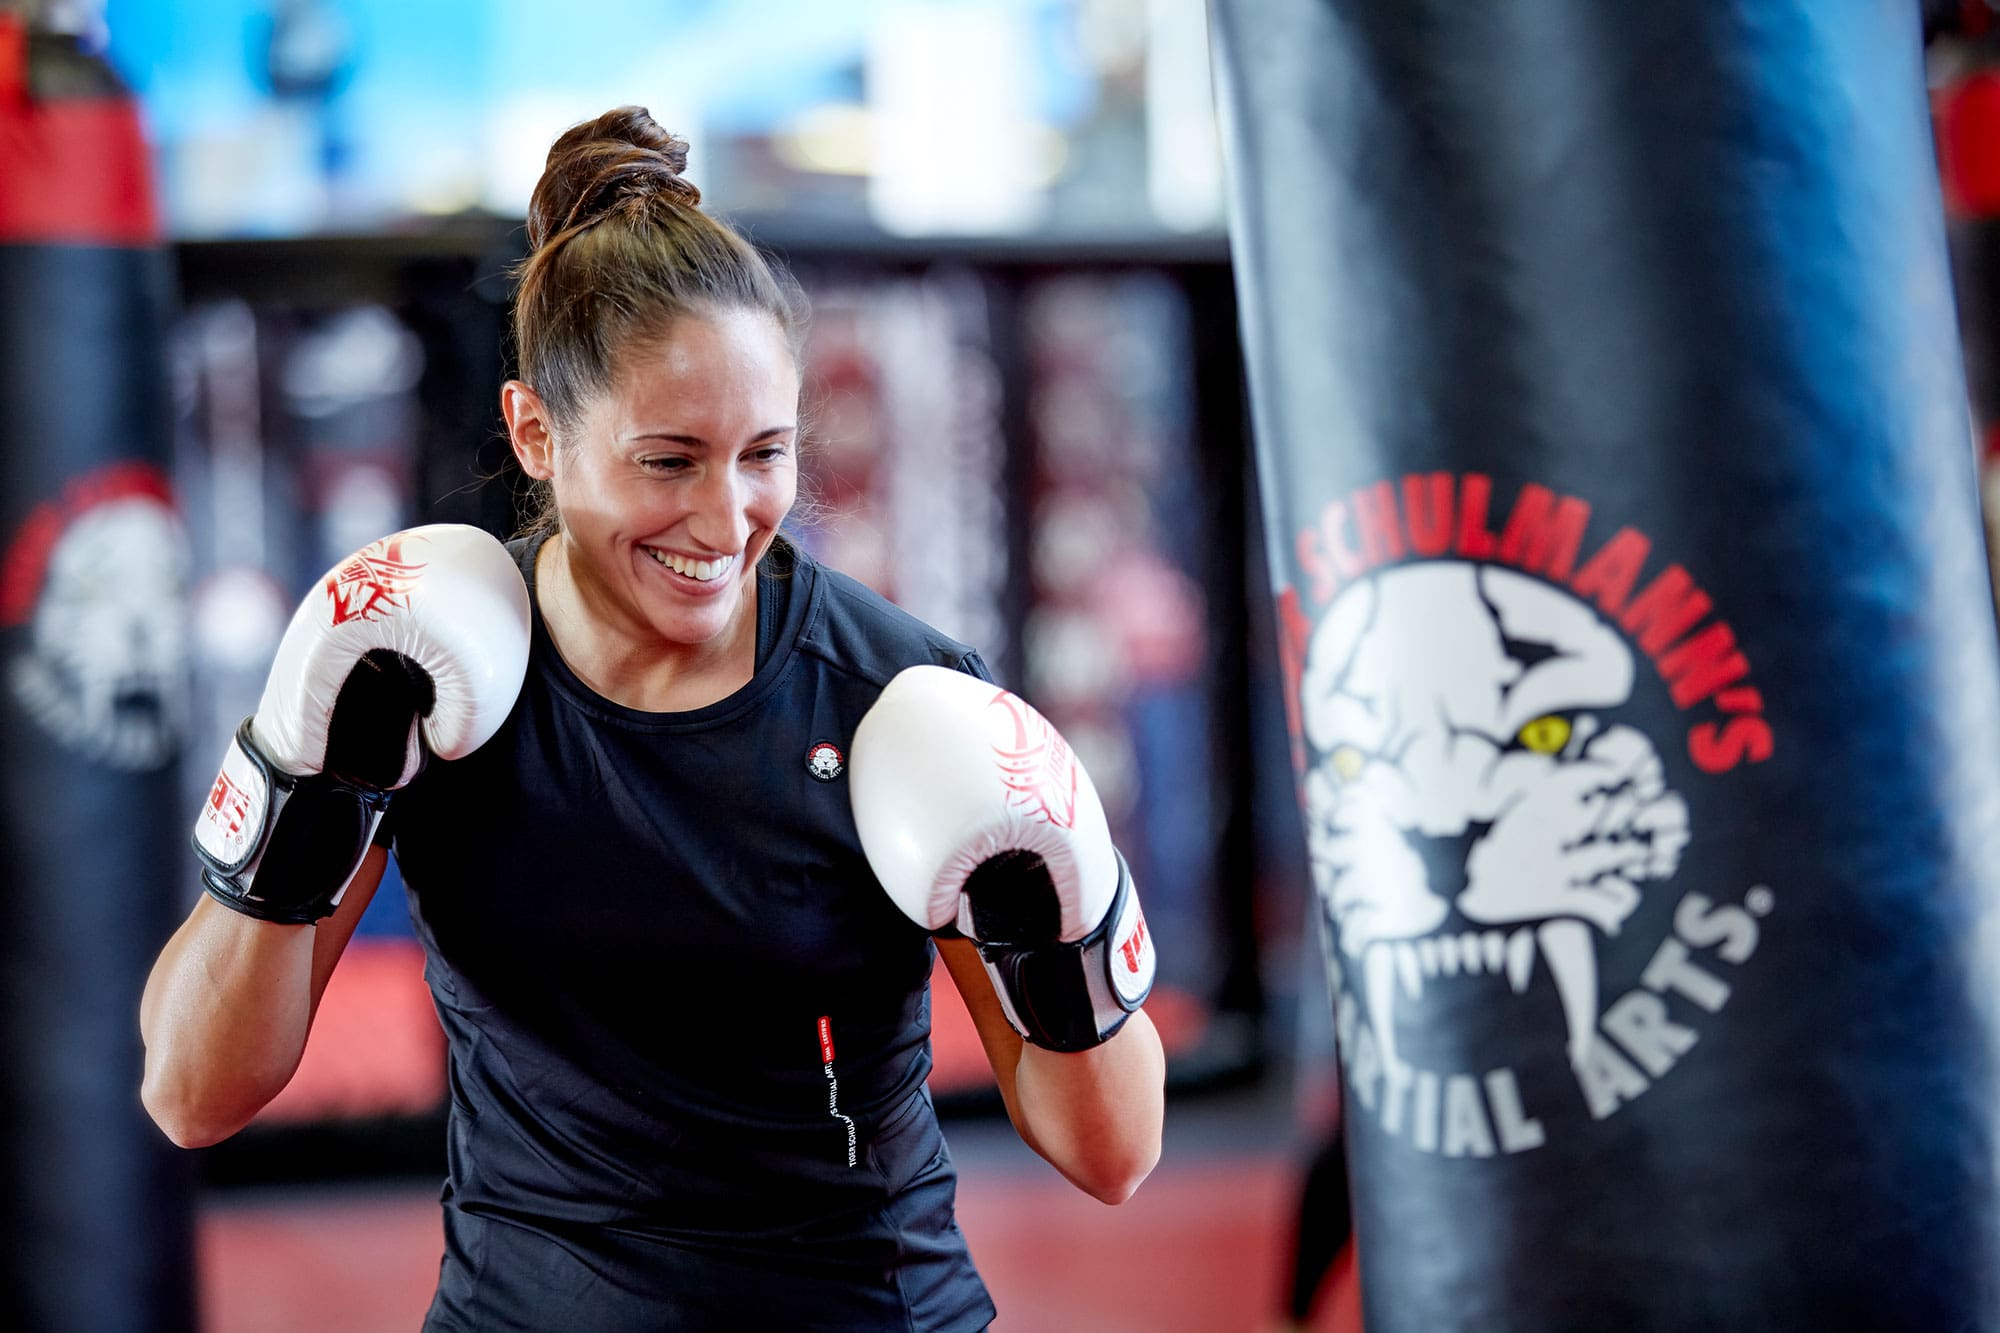 Woman kickboxer smiling and getting ready to punch the bag